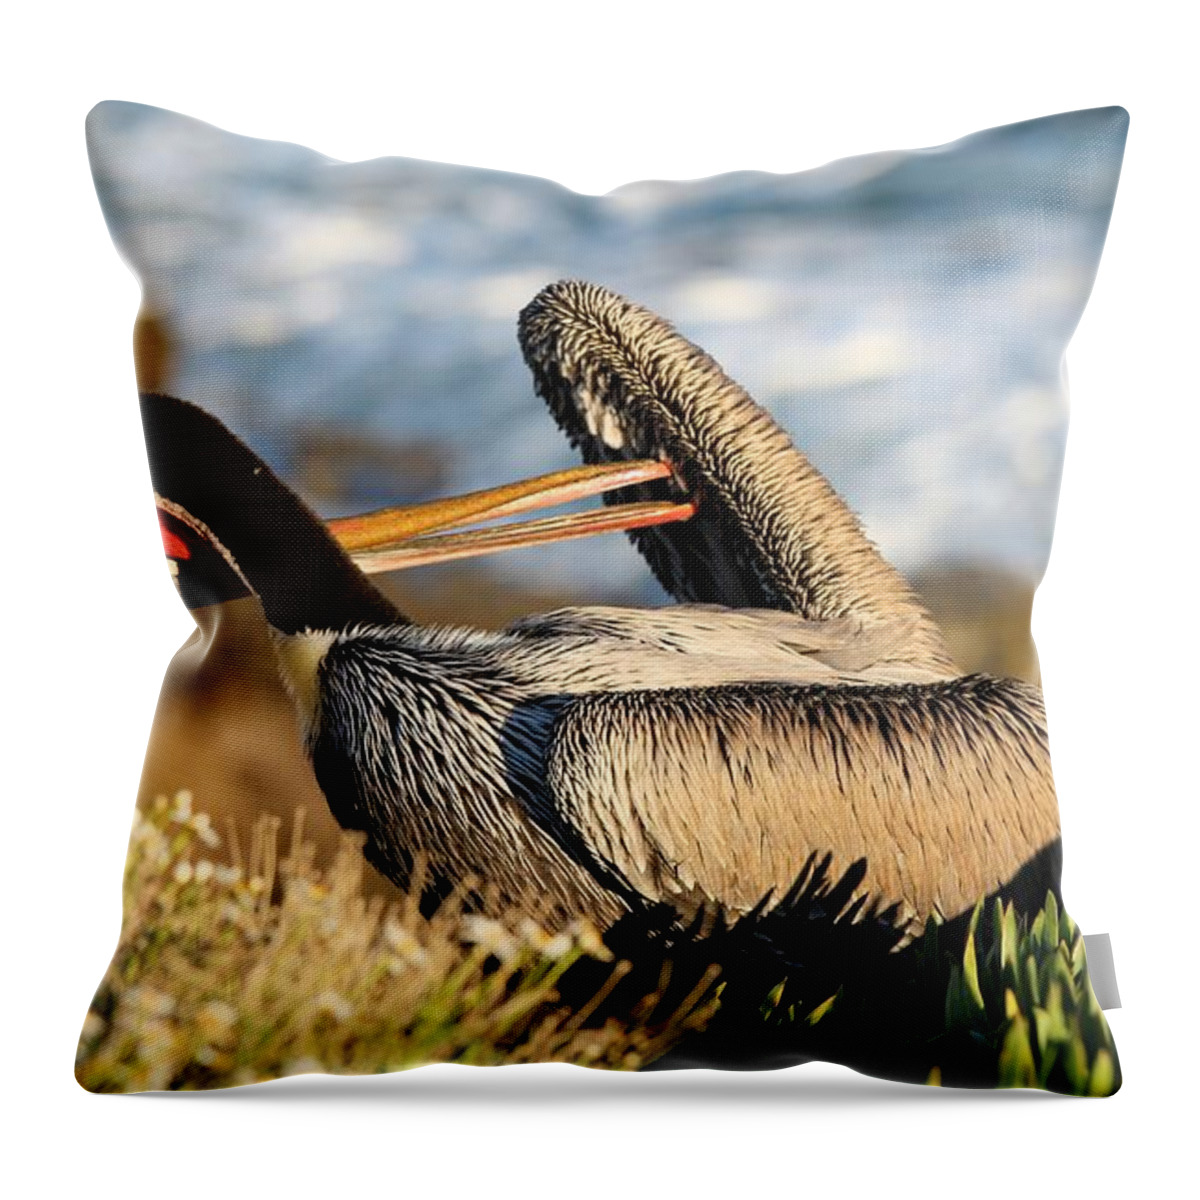 Pelican Throw Pillow featuring the photograph Pelican Twisting by Jane Girardot